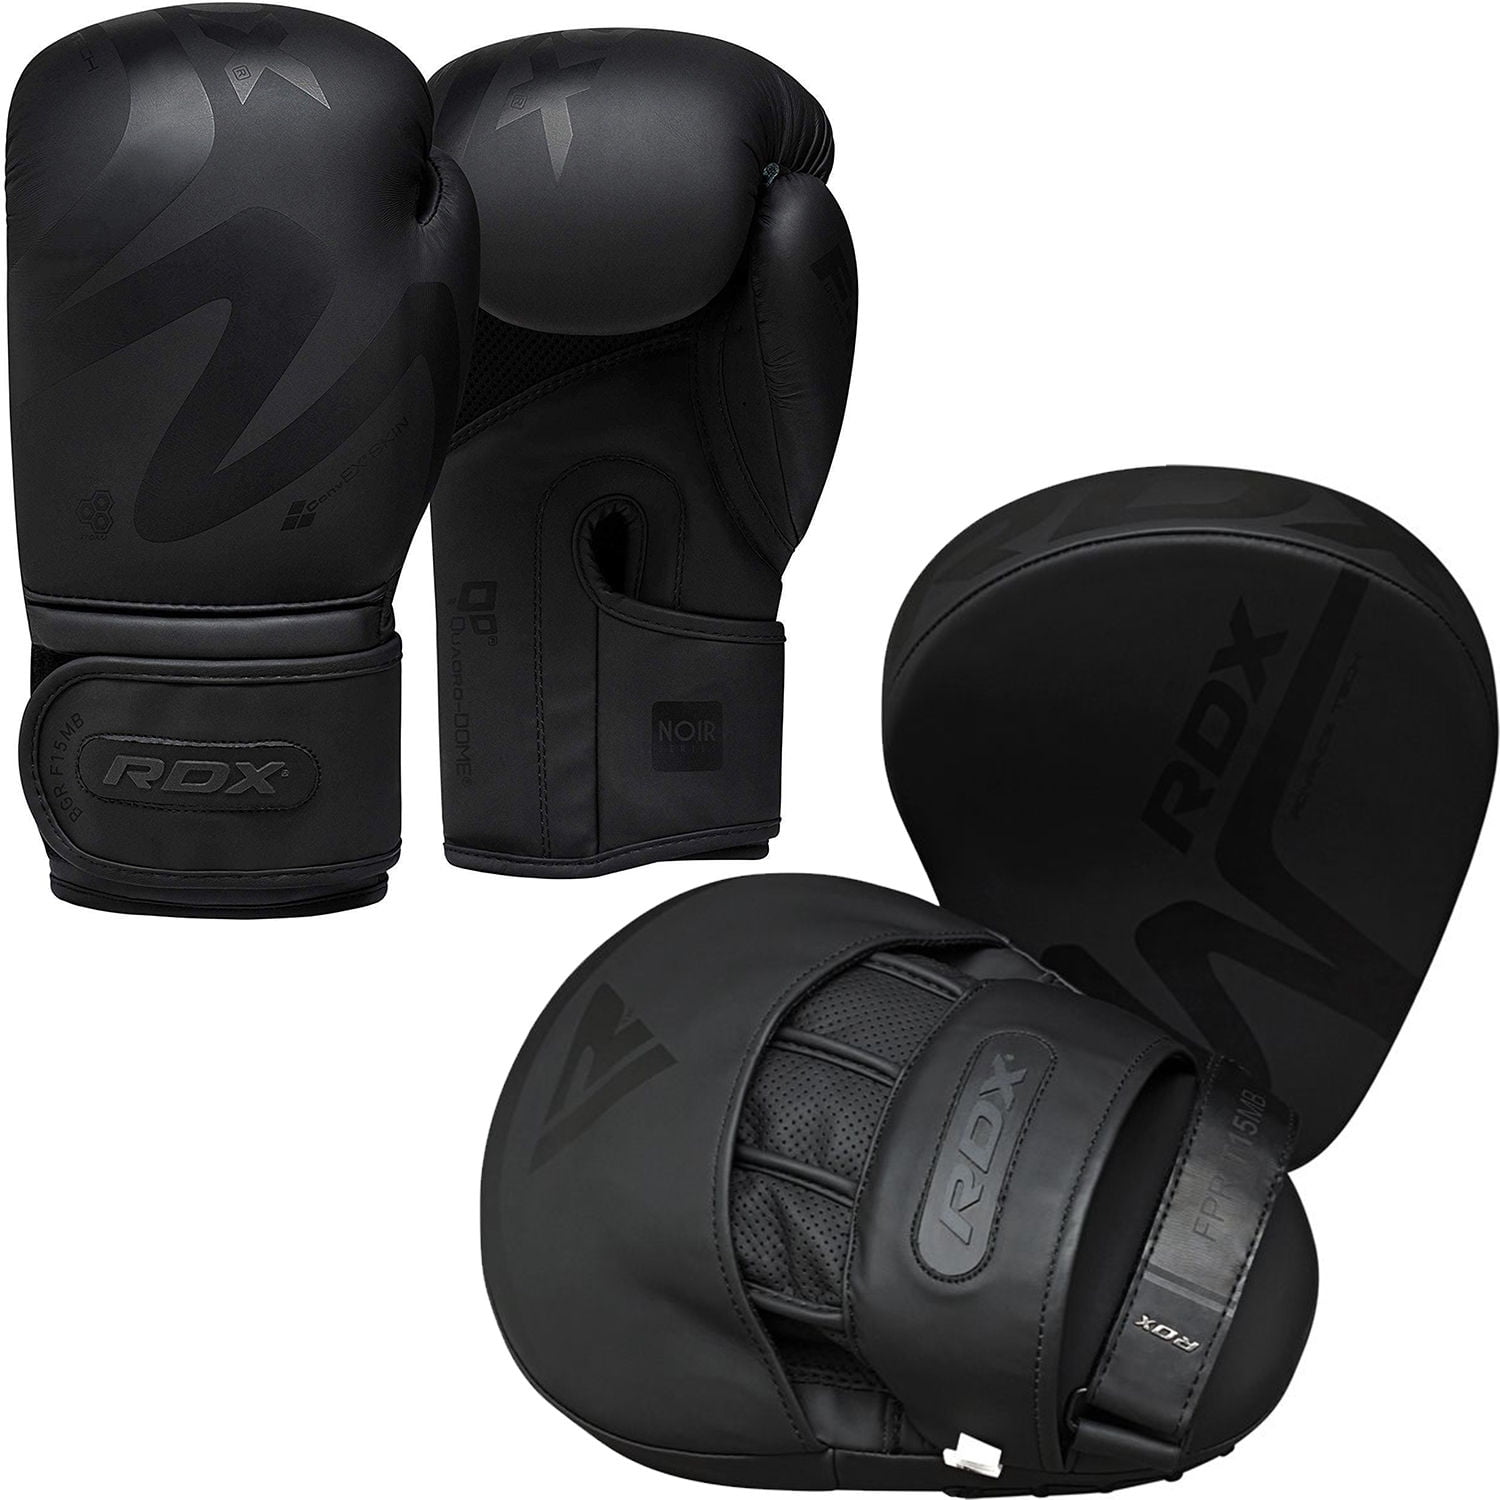 Ladies Focus Pads and Boxing Gloves Set Hook & Jabs Punch Mitts Women MMA Fight 